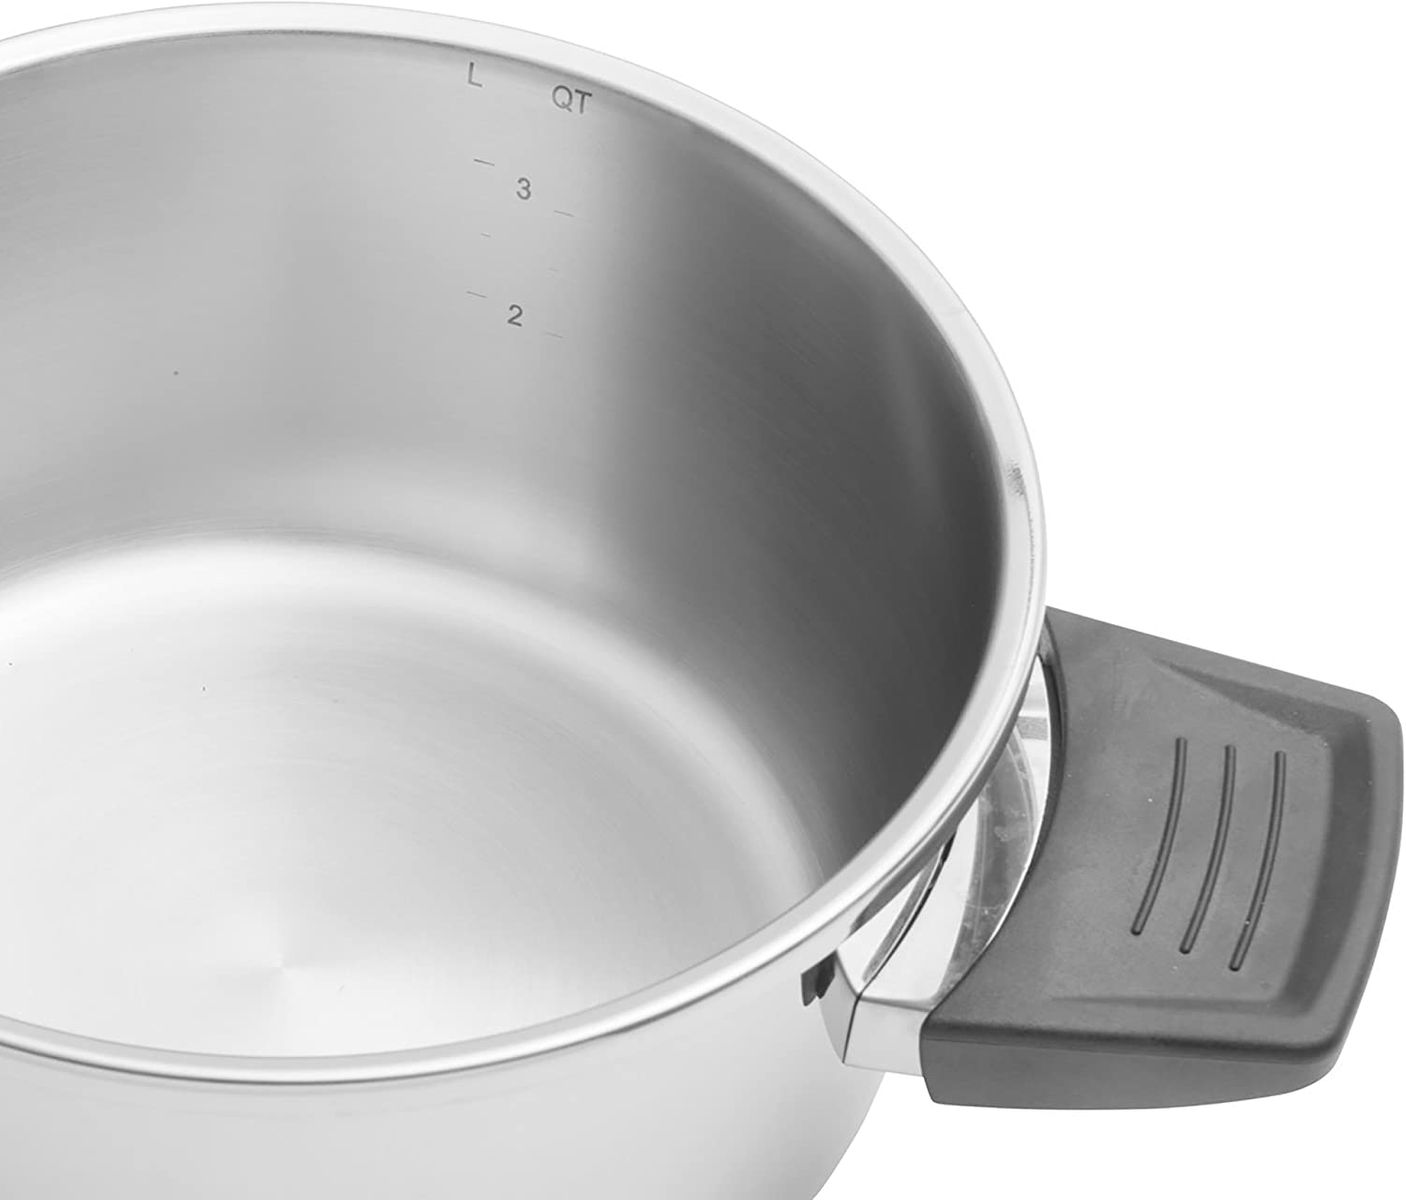 Berghoff Vita Stainless Steel Pressure Cooker with Lid Lock, 7.4 qt, Suitable for All Stoves